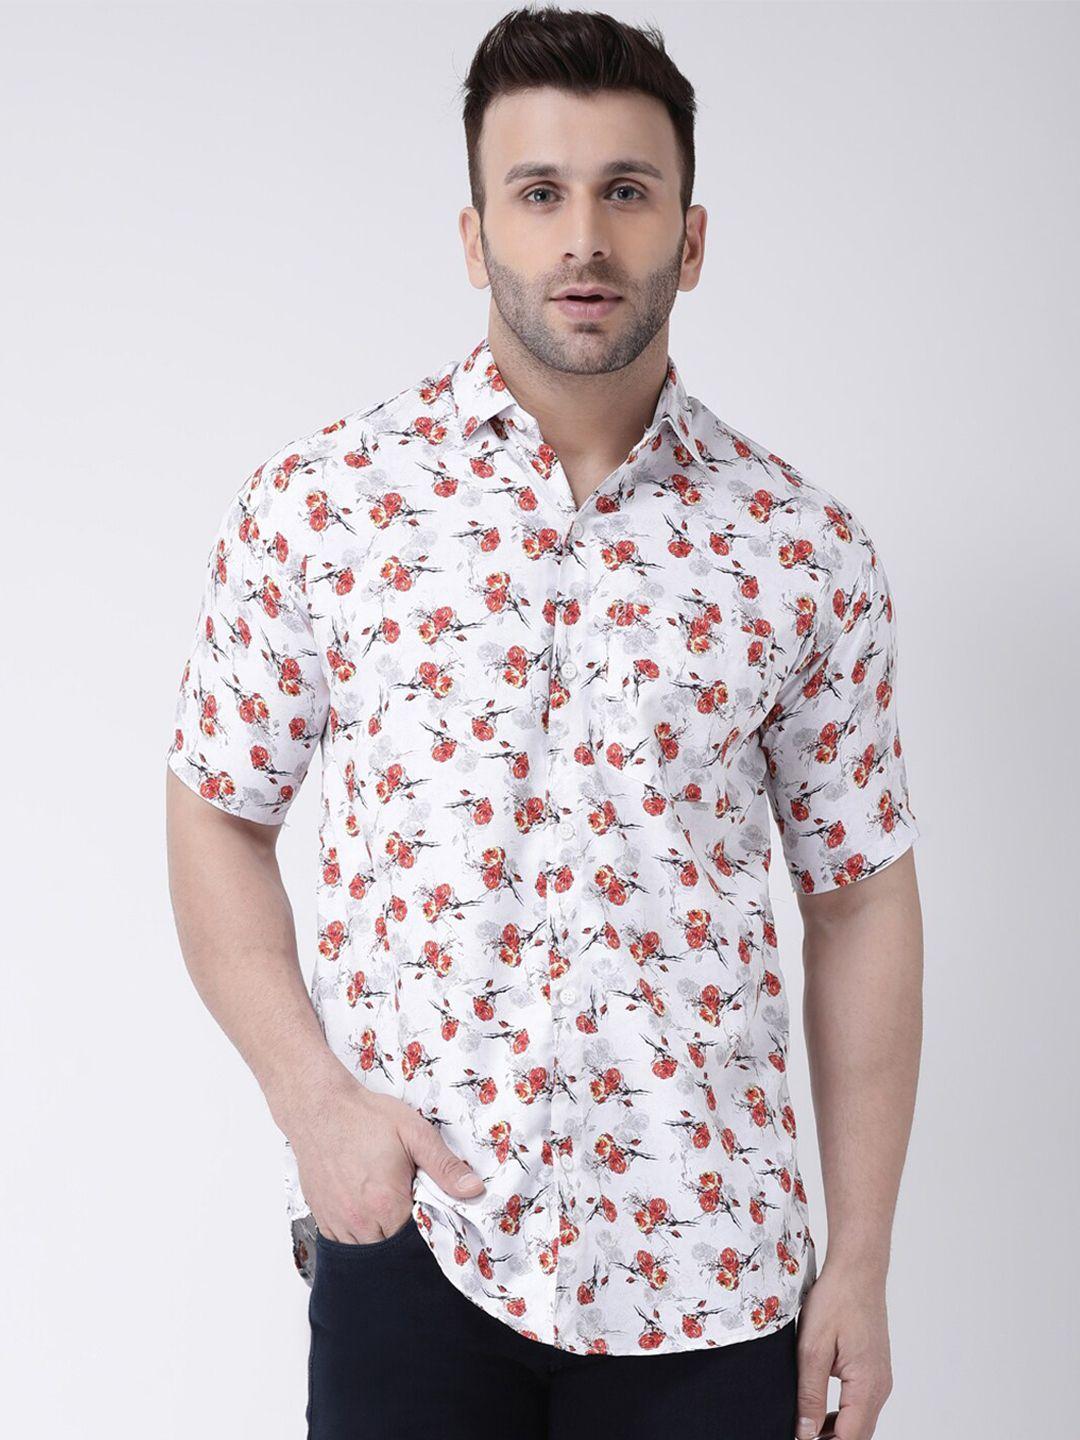 riag men white & red floral printed casual shirt